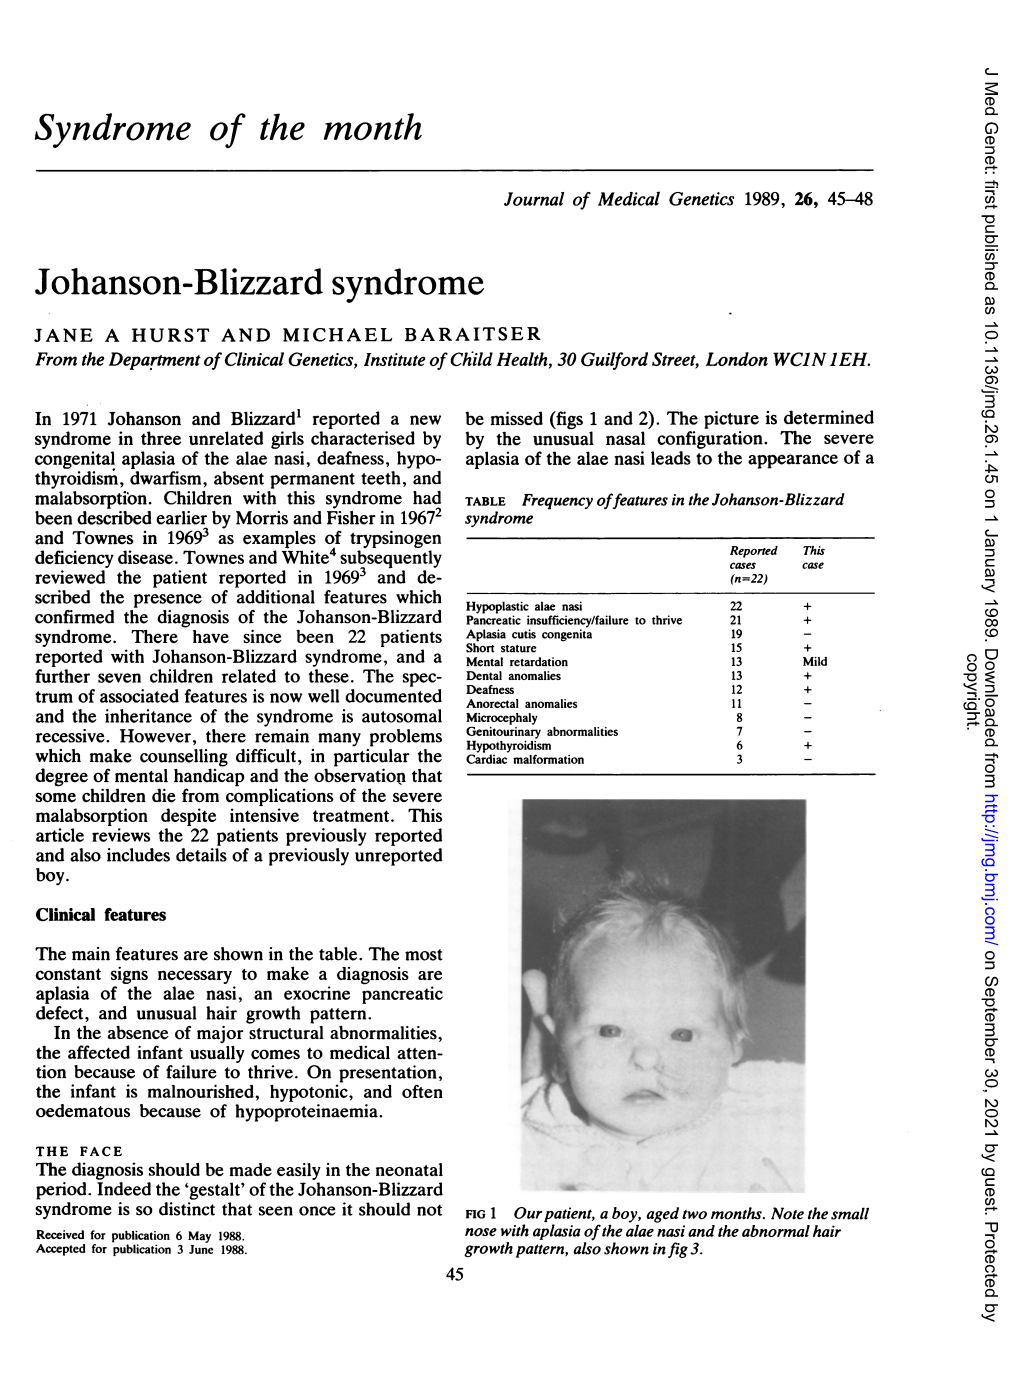 Syndrome of the Month Johanson-Blizzard Syndrome